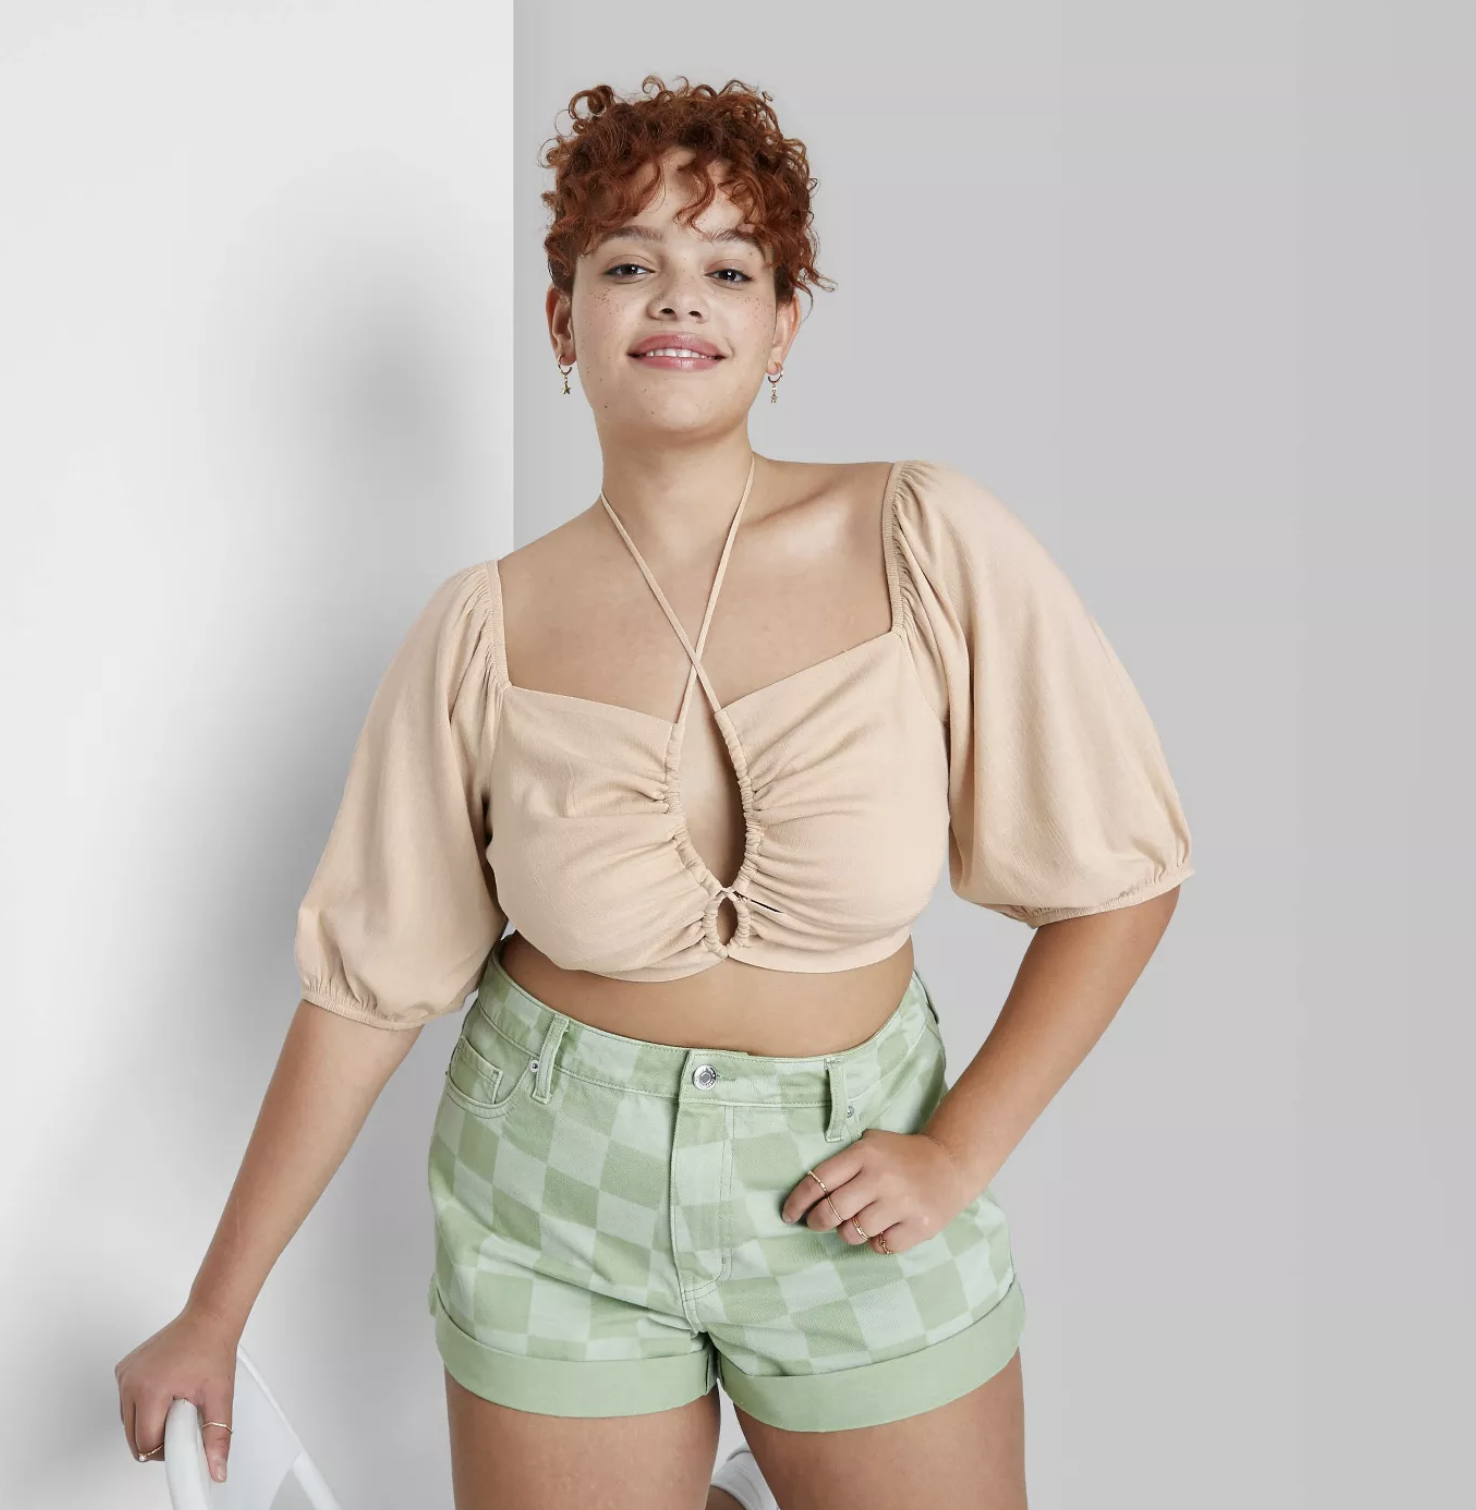 model wearing the top in tan with green checkered shorts